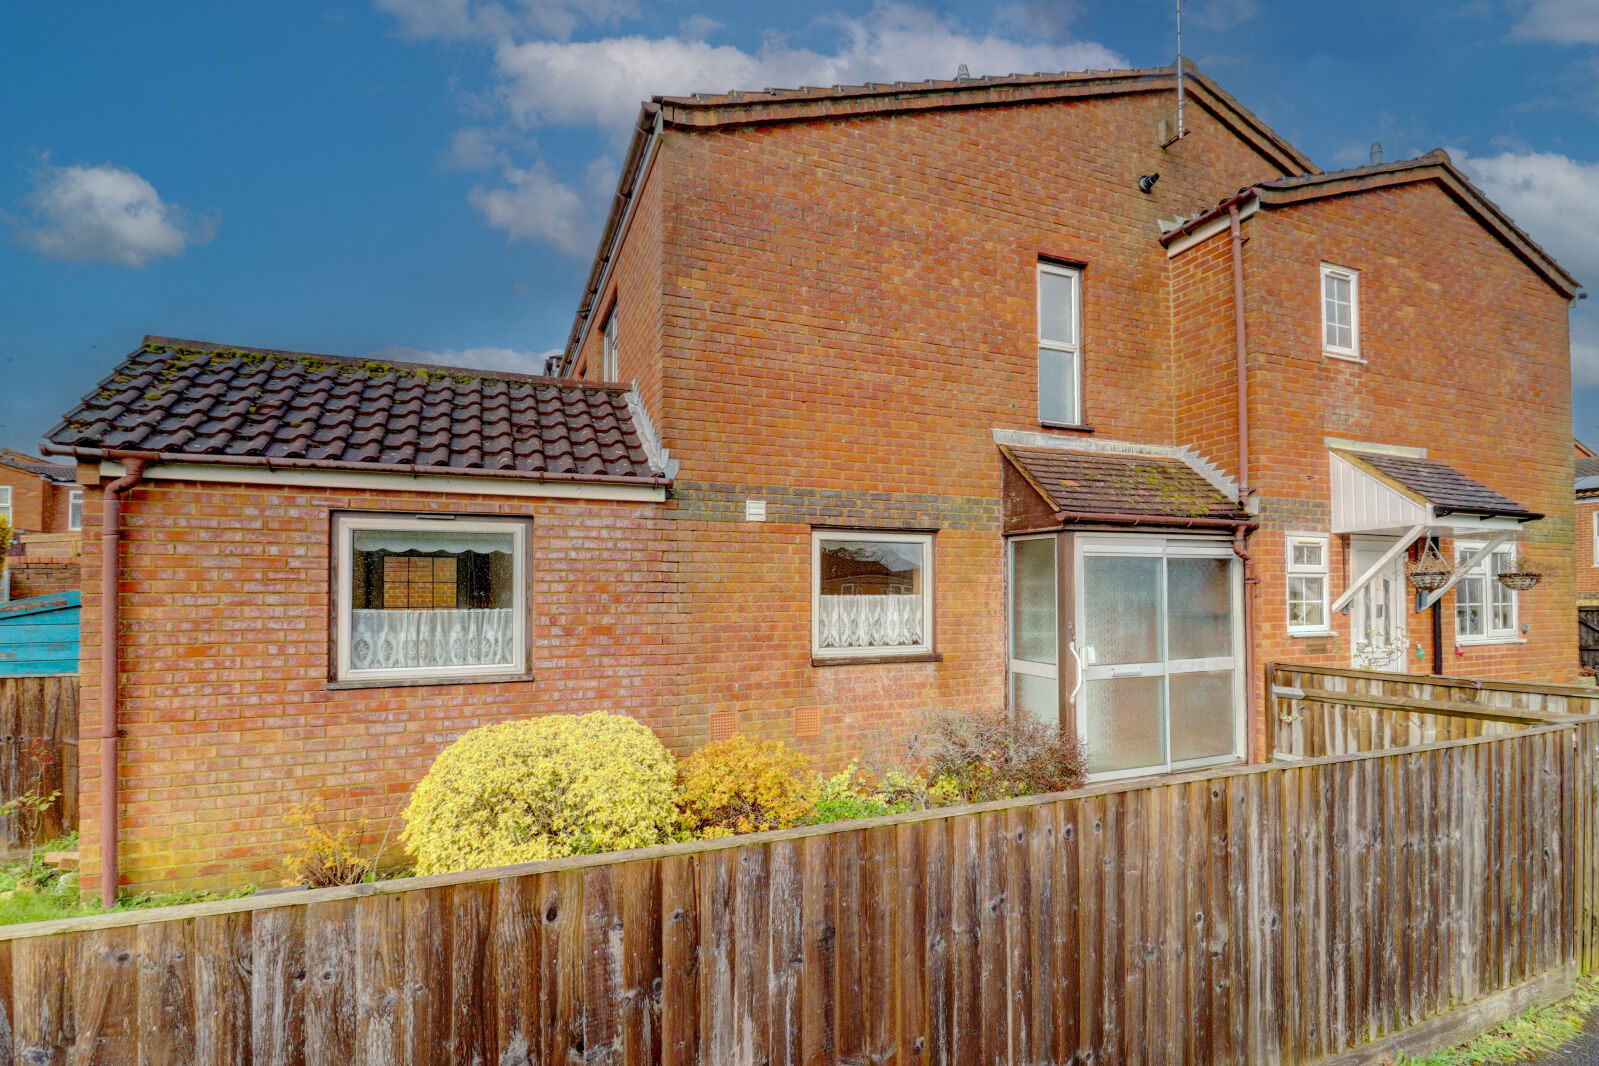 3 bedroom  house for sale Shrimpton Road, High Wycombe, HP12, main image